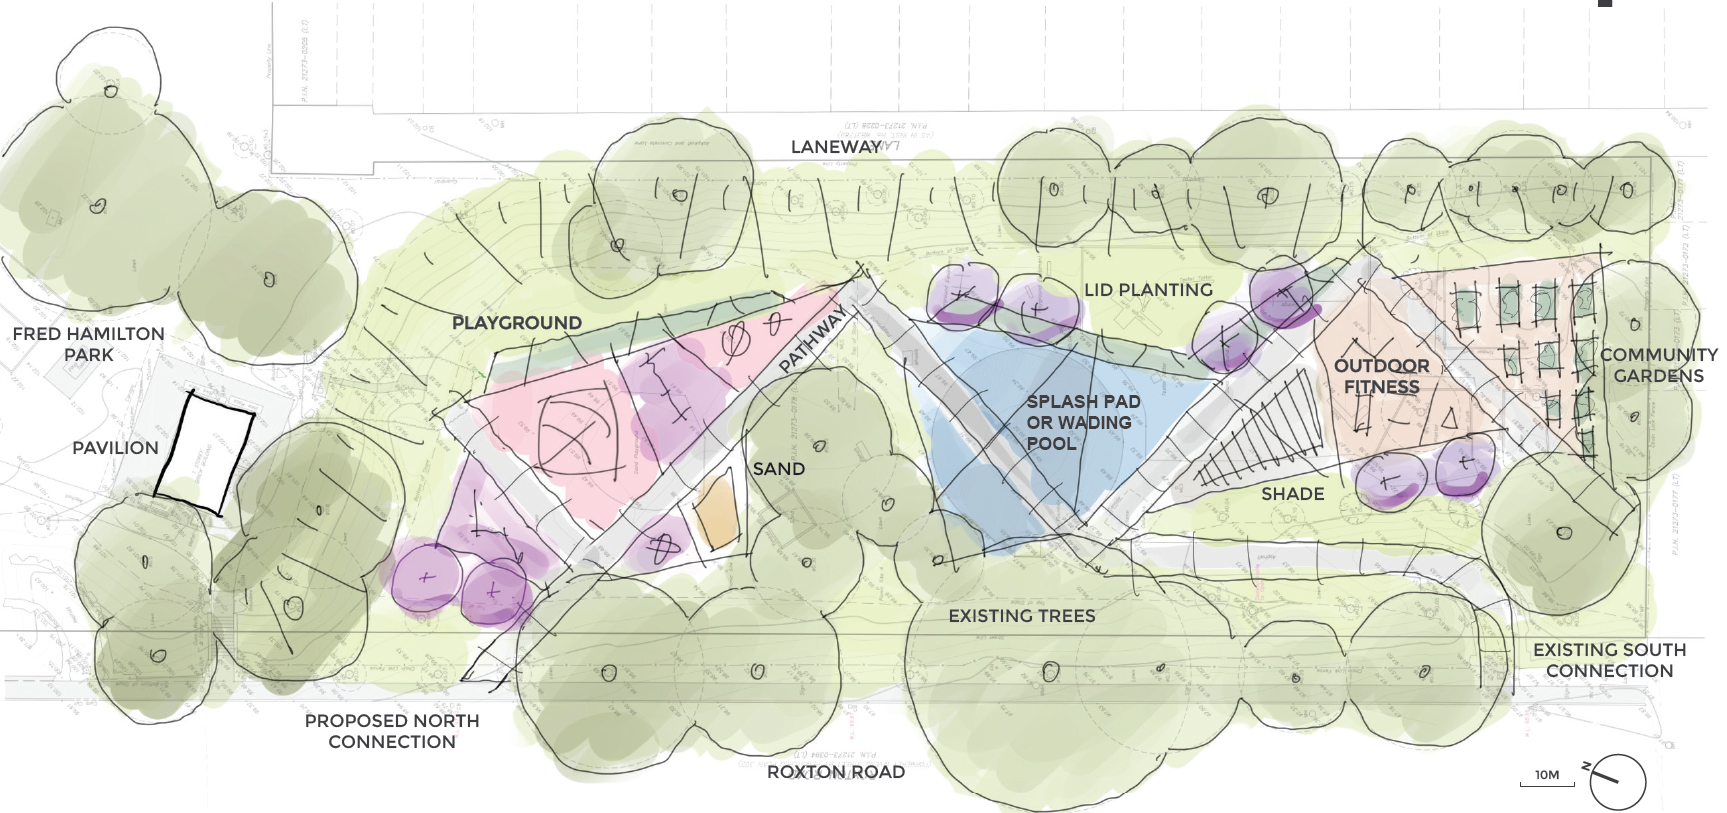 A sketch-style concept plan for the playground and wading pool enhancements. The layout is defined by the zig-zag pathway that connects the north to the south end of the park. The playground is shown in pink, the splash pad is shown in blue, the outdoor fitness area is shown in light brown and the new plantings are shown in purple focused in the center of the park. 